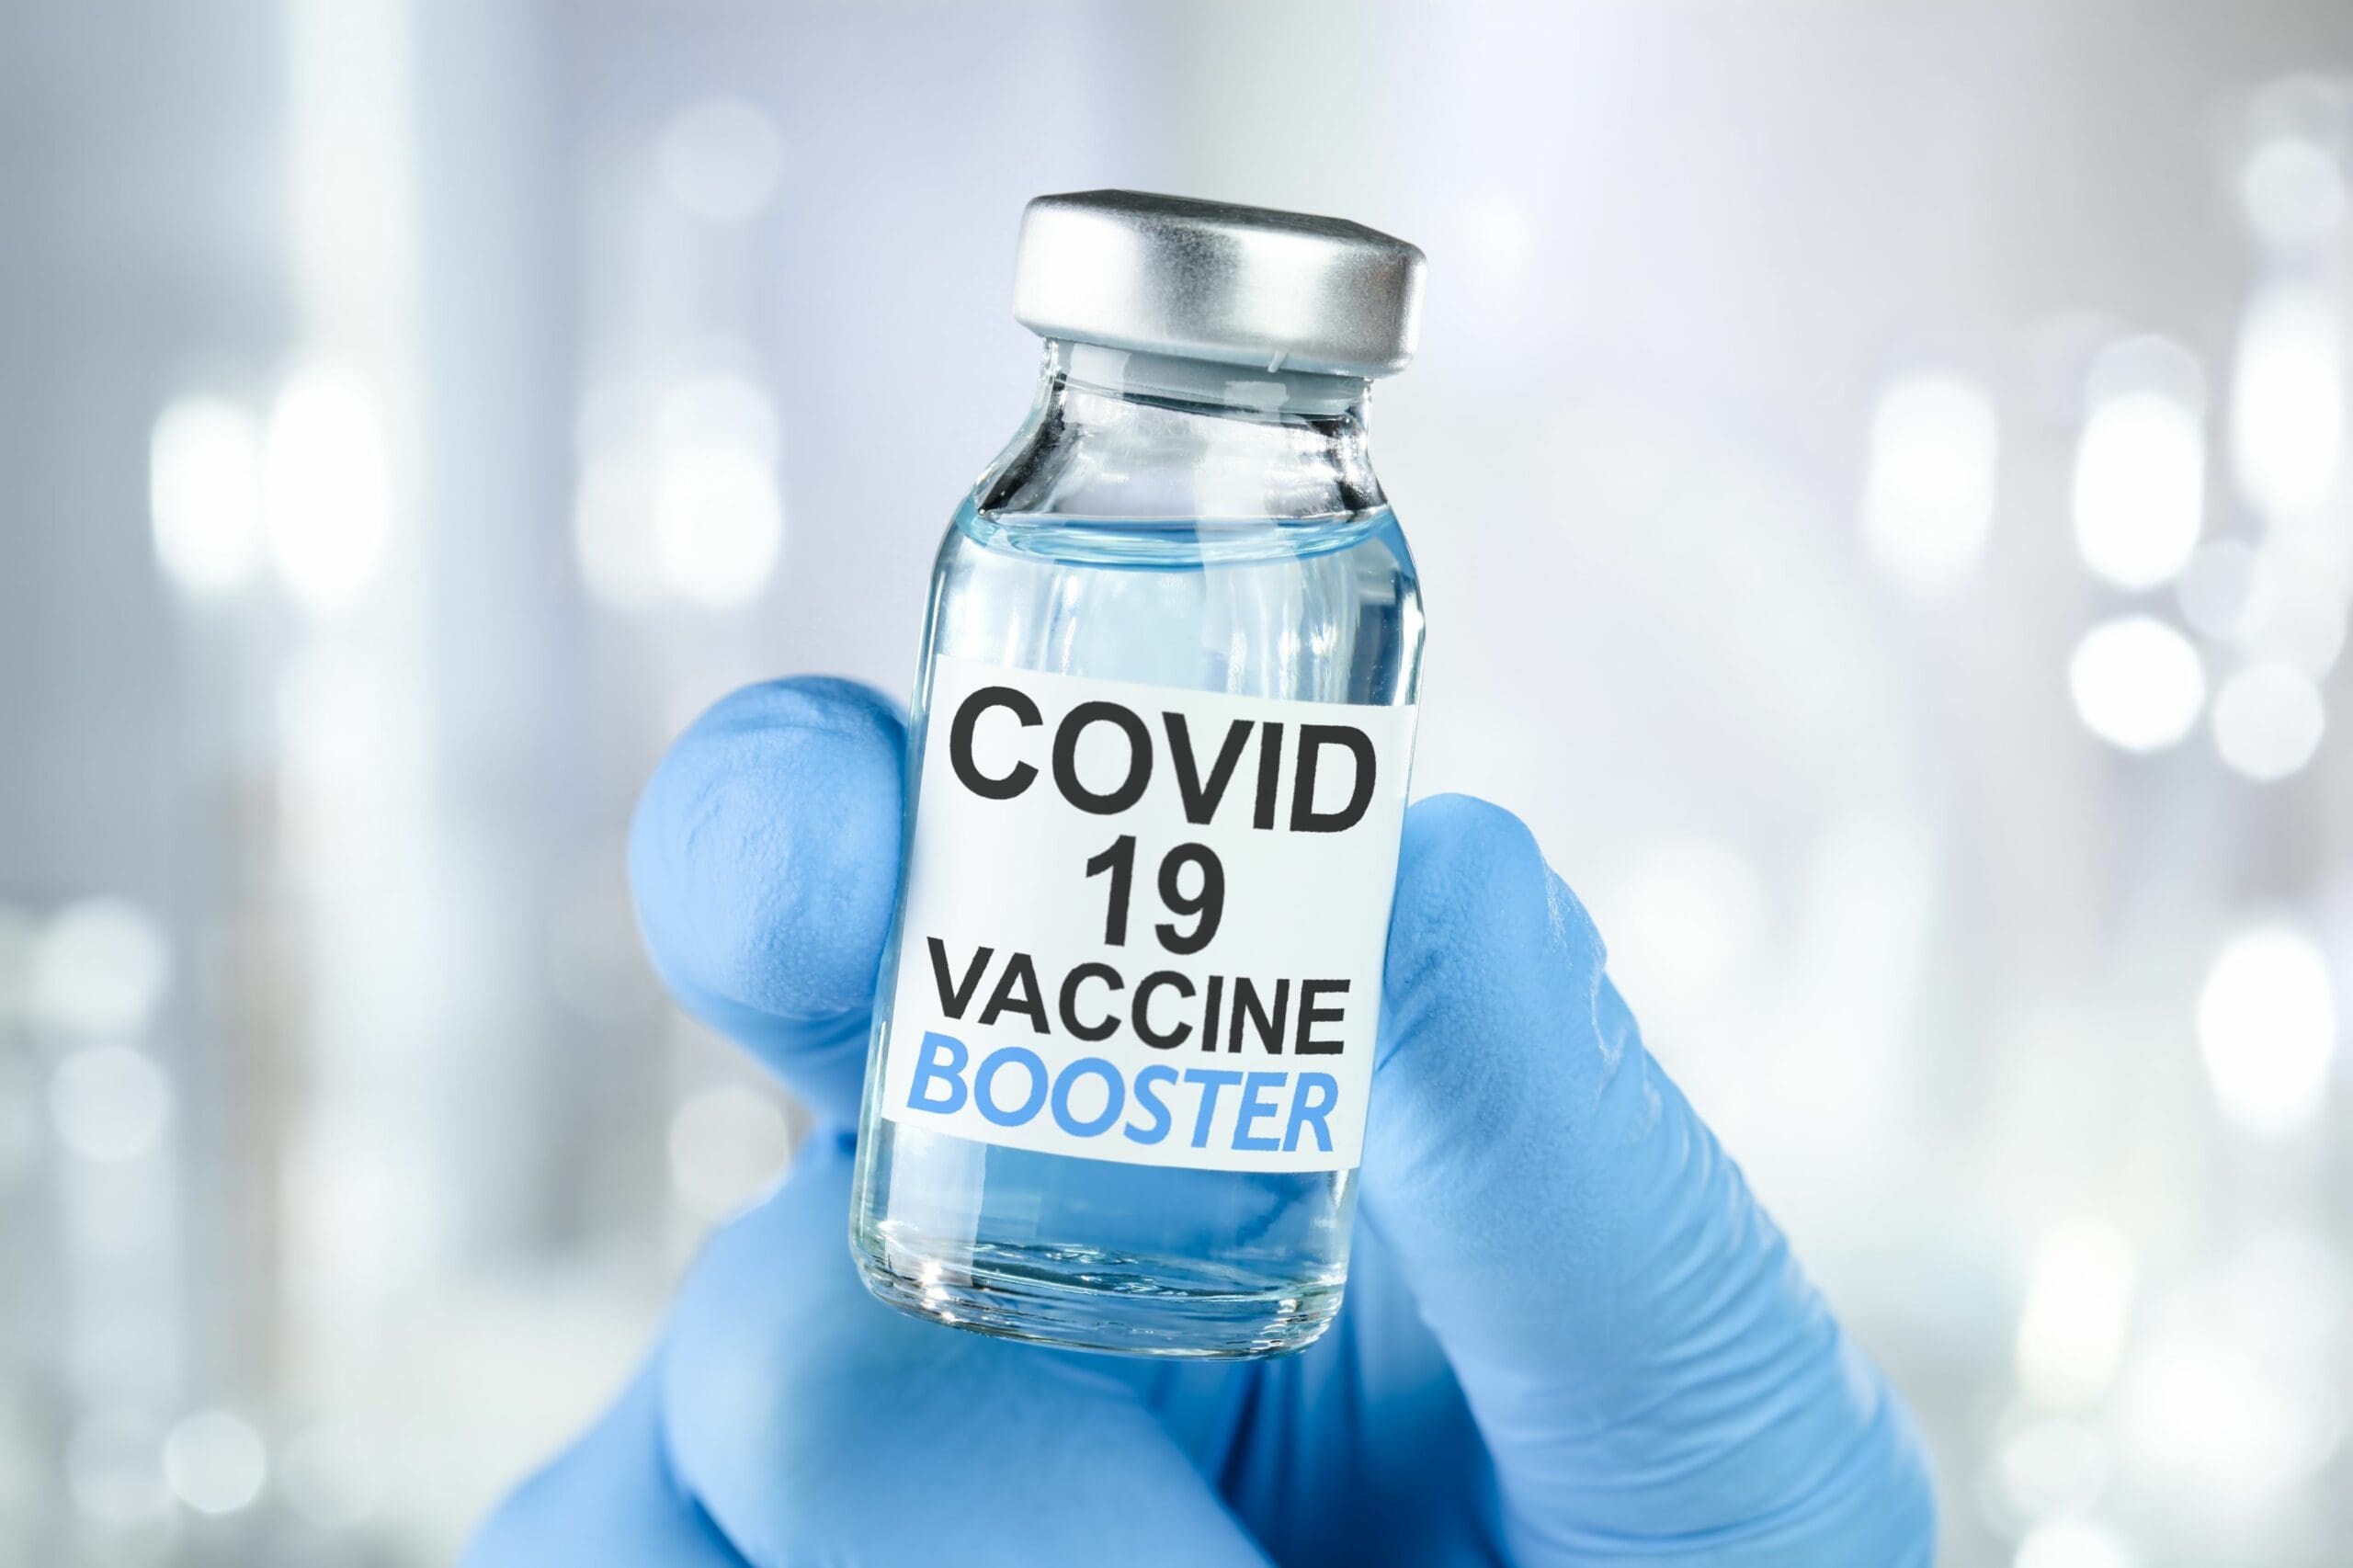 How important are COVID-19 vaccine boosters